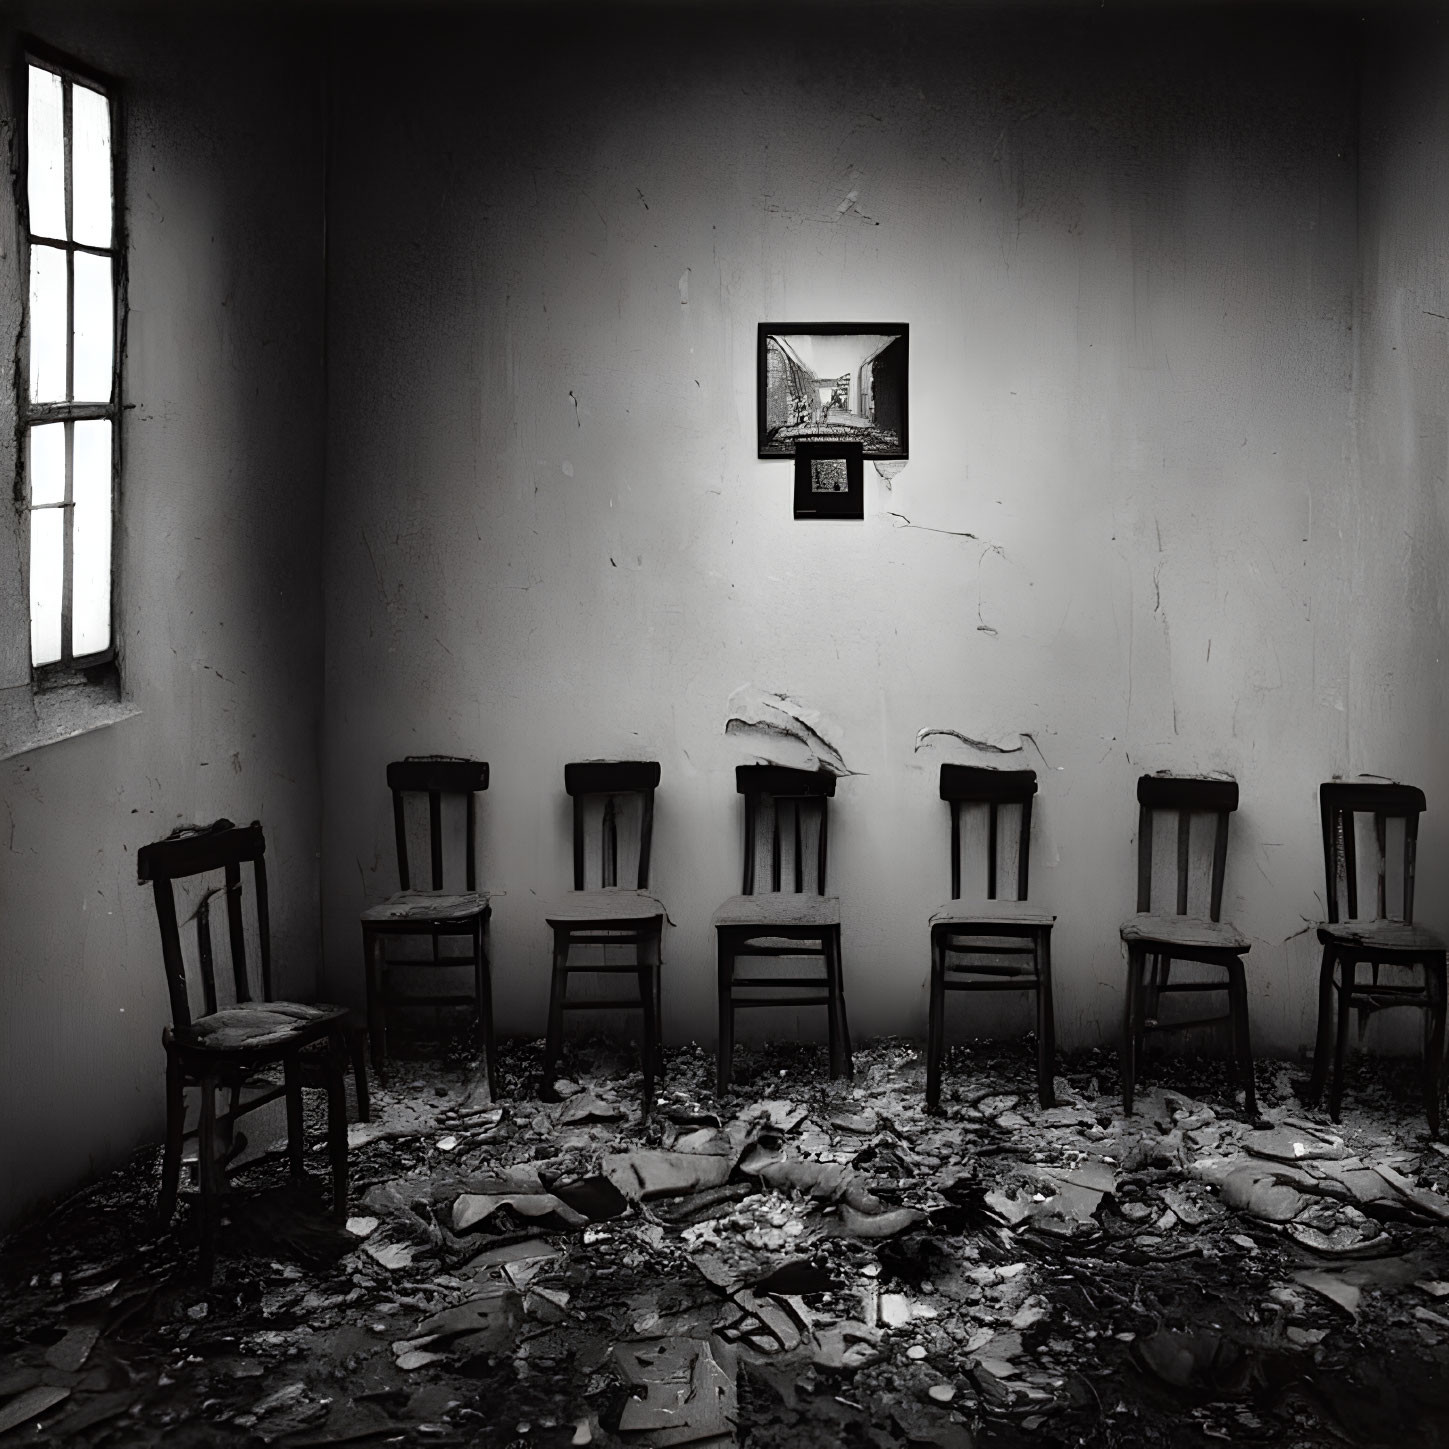 Monochrome photo of old wooden chairs in disarray